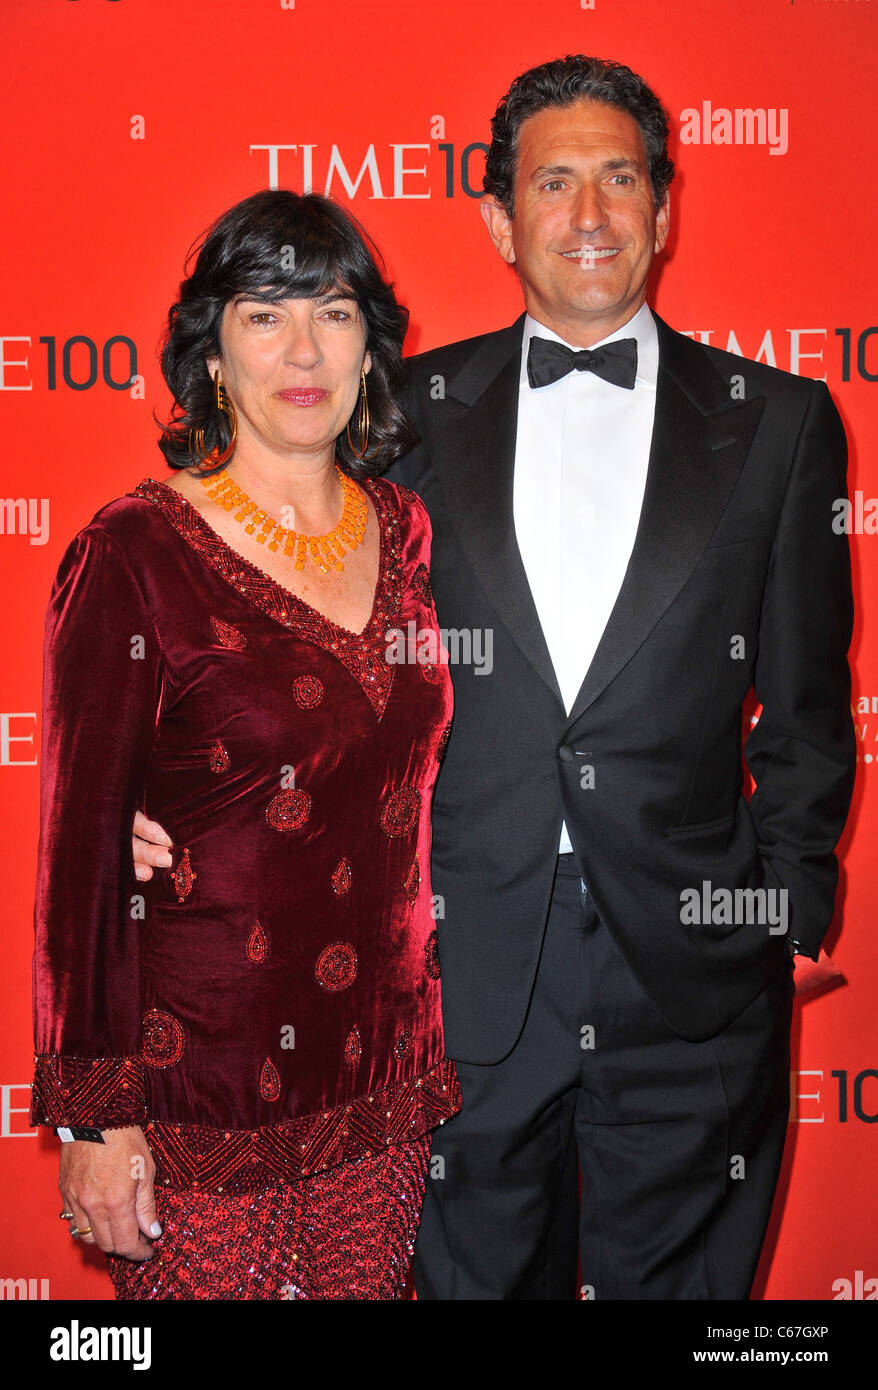 Christiane Amanpour, James Rubin at arrivals for TIME 100 GALA, Frederick P. Rose Hall - Jazz at Lincoln Center, New York, NY April 26, 2011. Photo By: Gregorio T. Binuya/Everett Collection Stock Photo